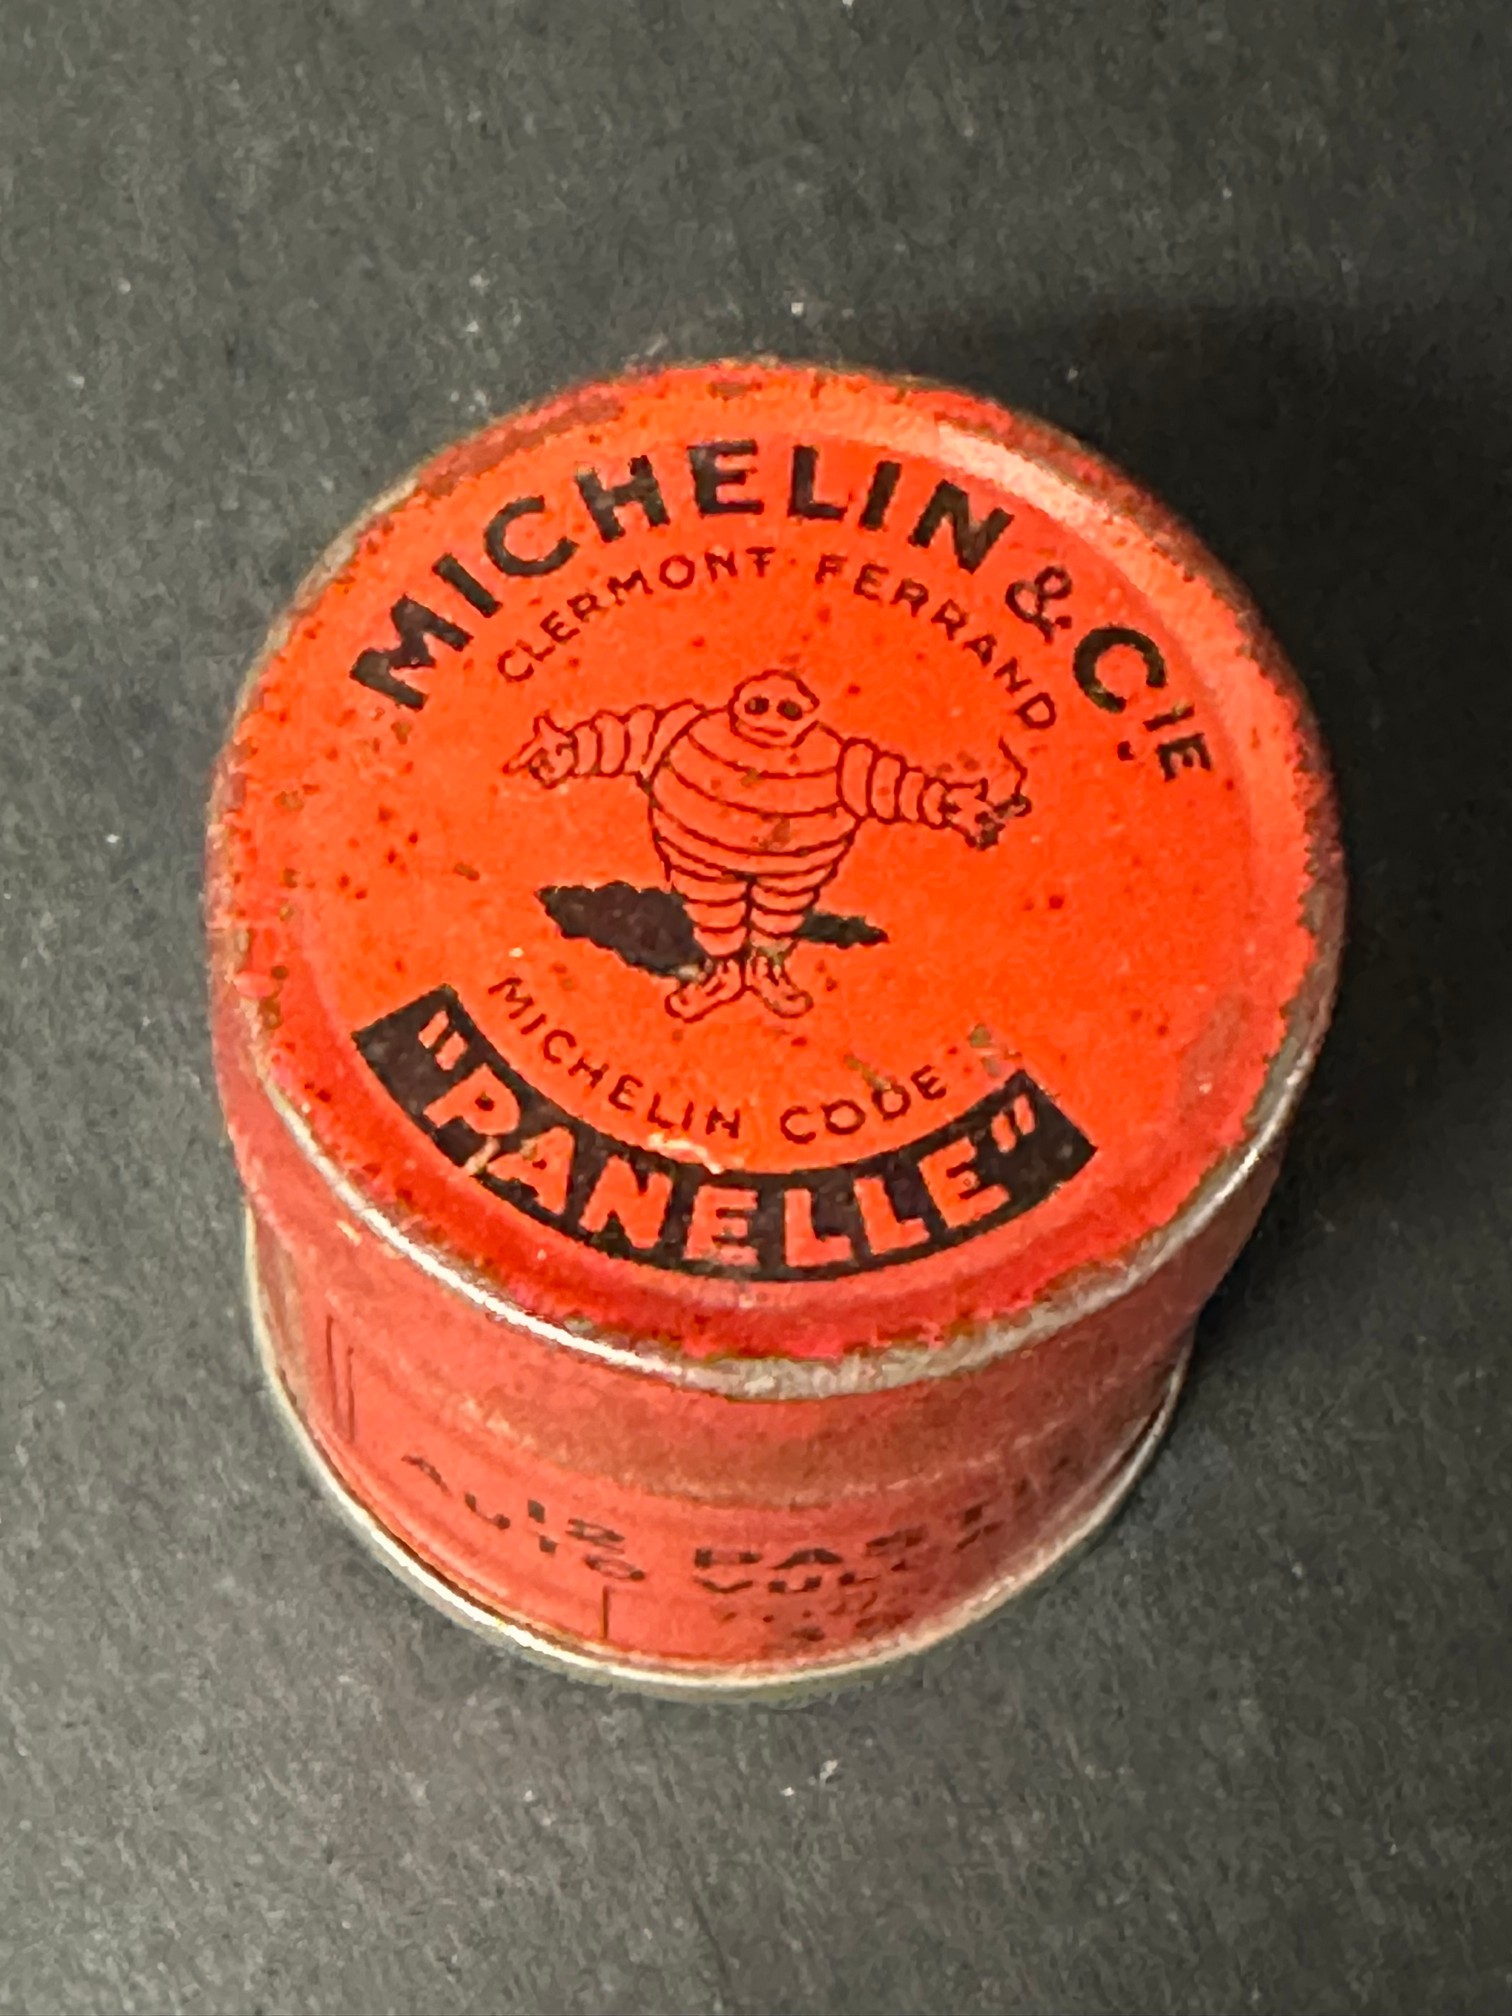 A Michelin & Cie "Panelle" miniature cylindrical tin for 12 Auto Valcanisantes Pastilles, 1 1/2"